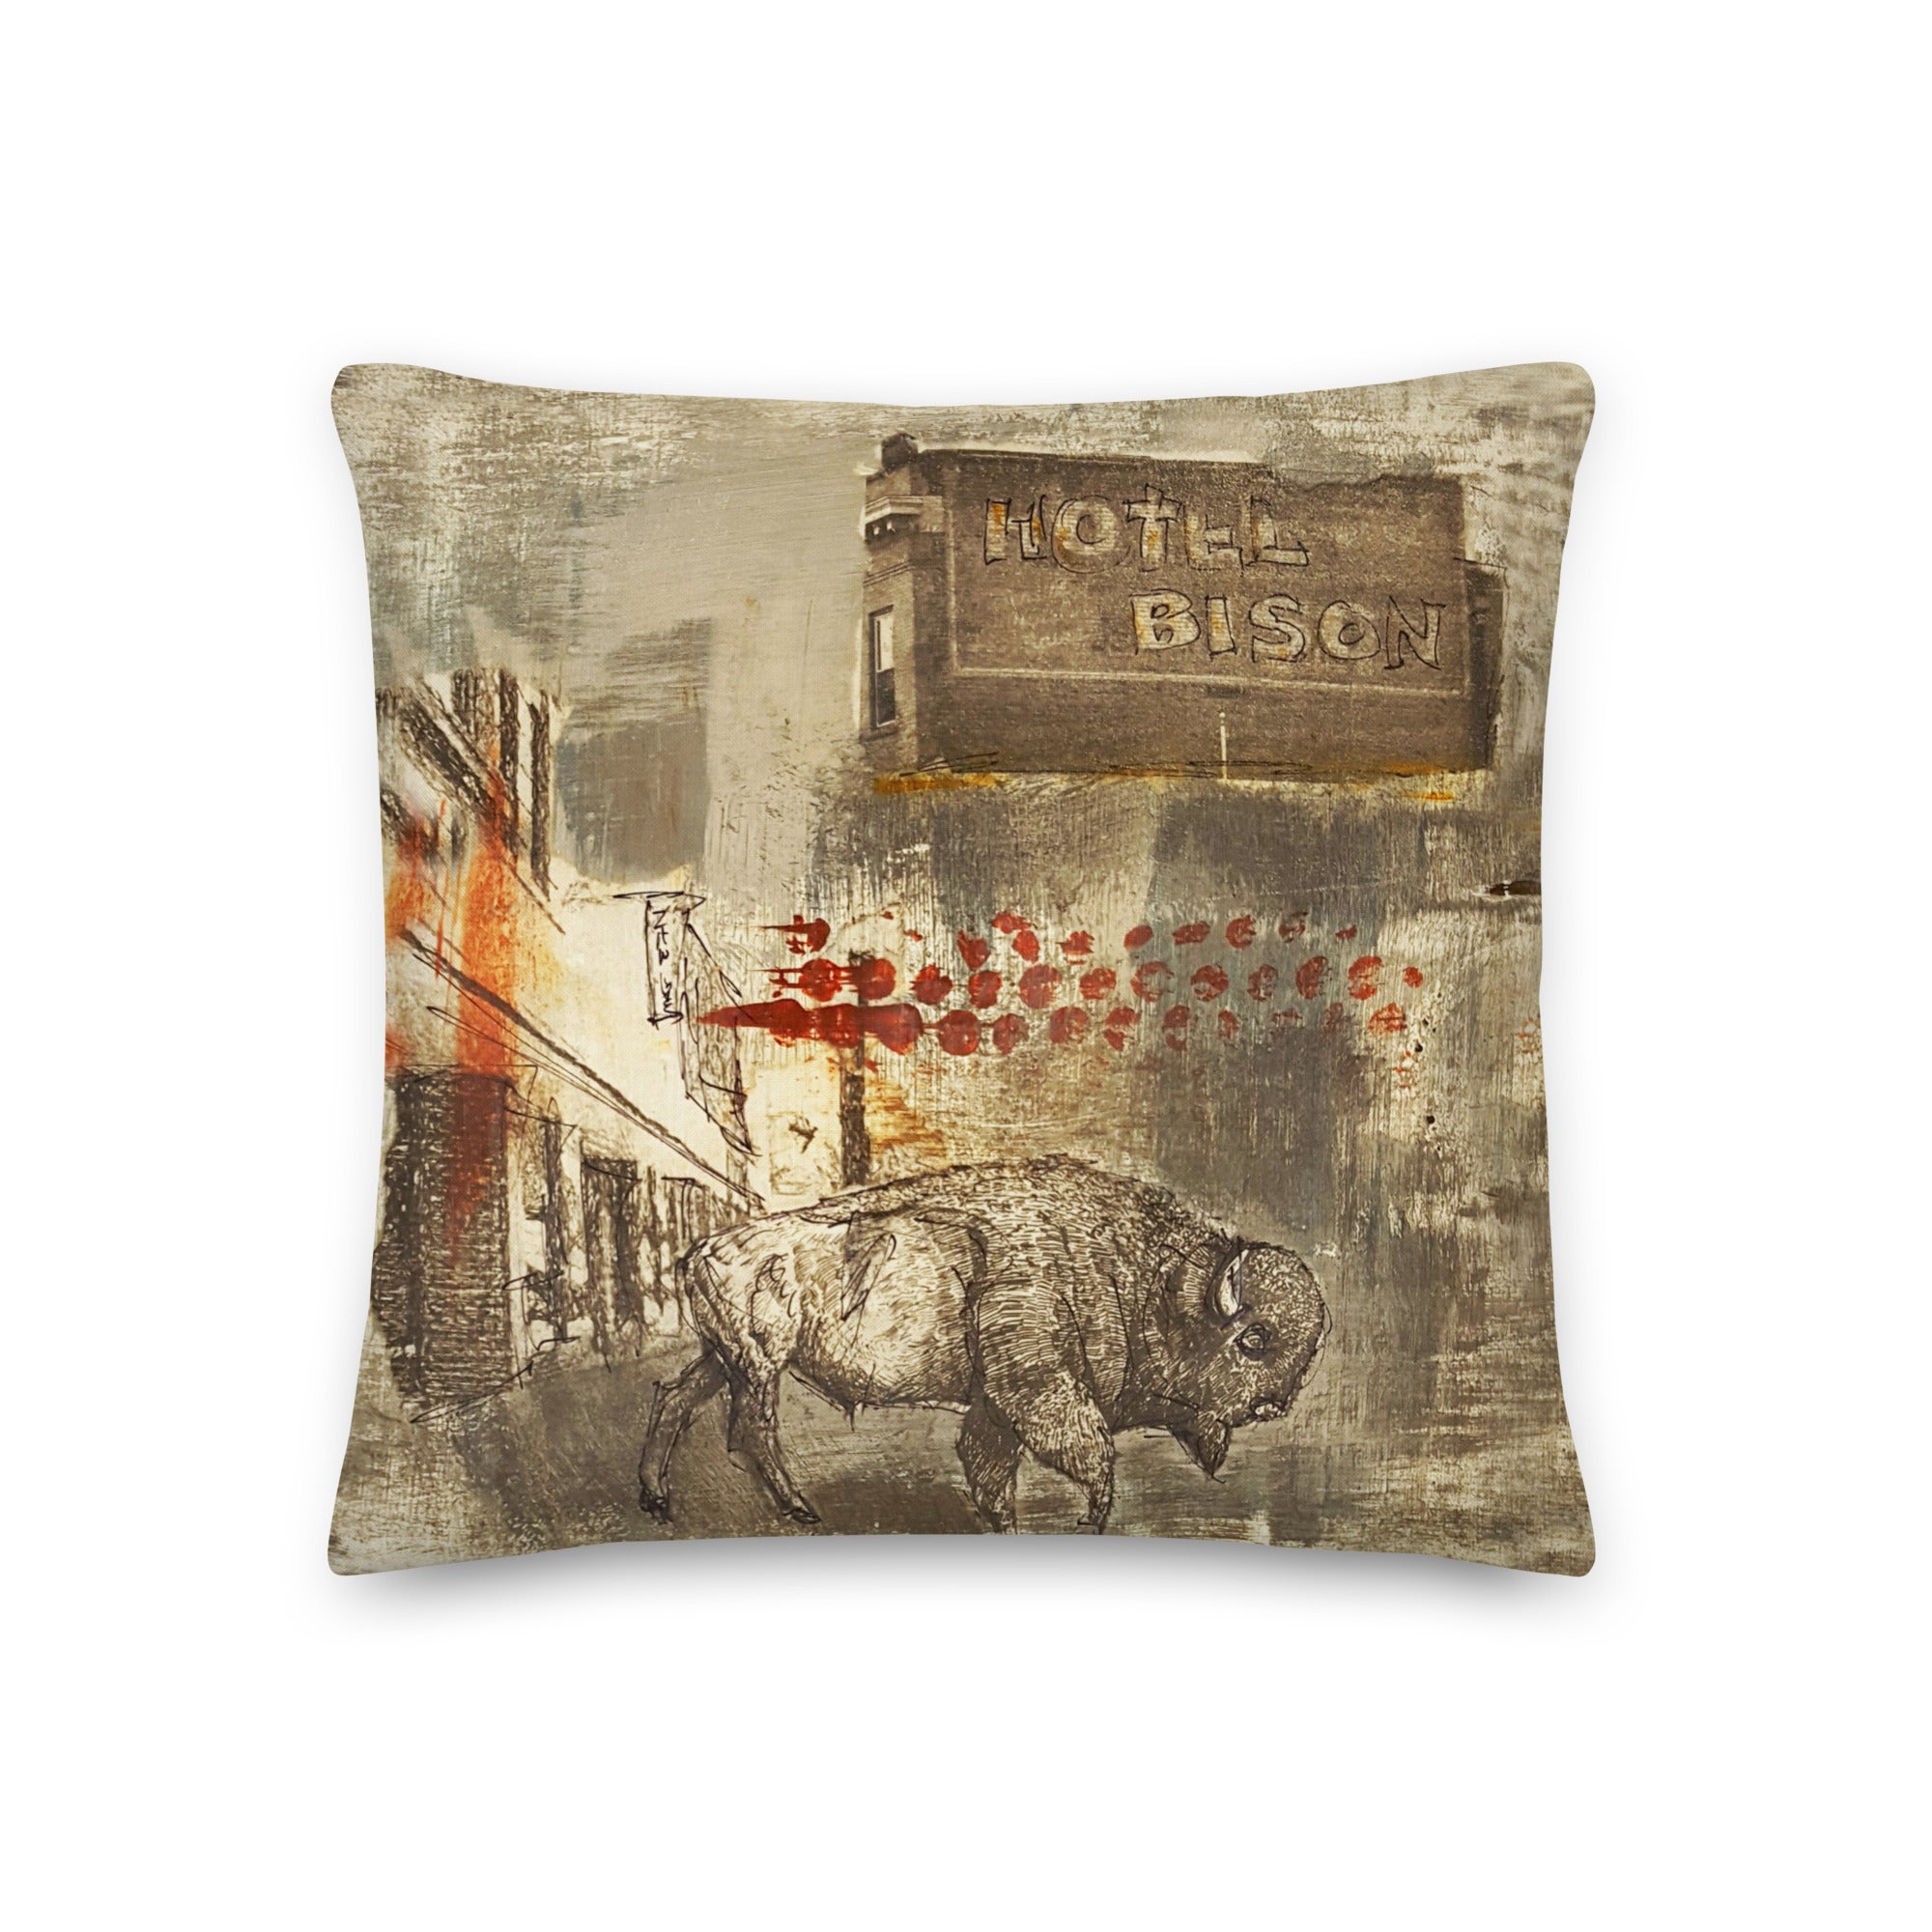 Hotel Bison I - Artful, Decorative Throw Pillow with bison roaming under Hotel Bison sign in abstract downtown setting.  Original art on pillow.